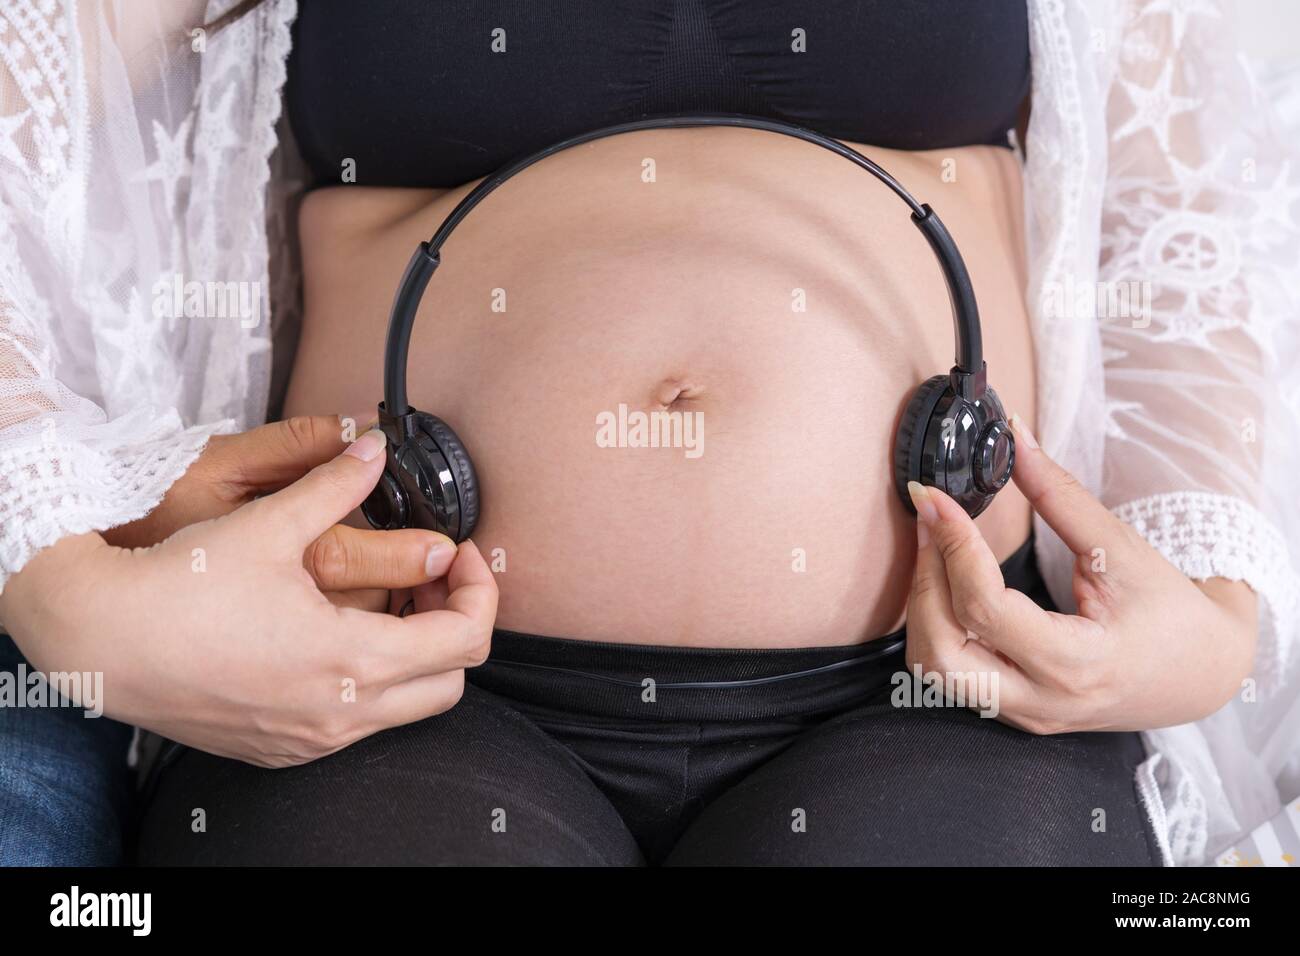 Pregnant woman holding headphones on belly, Stock image